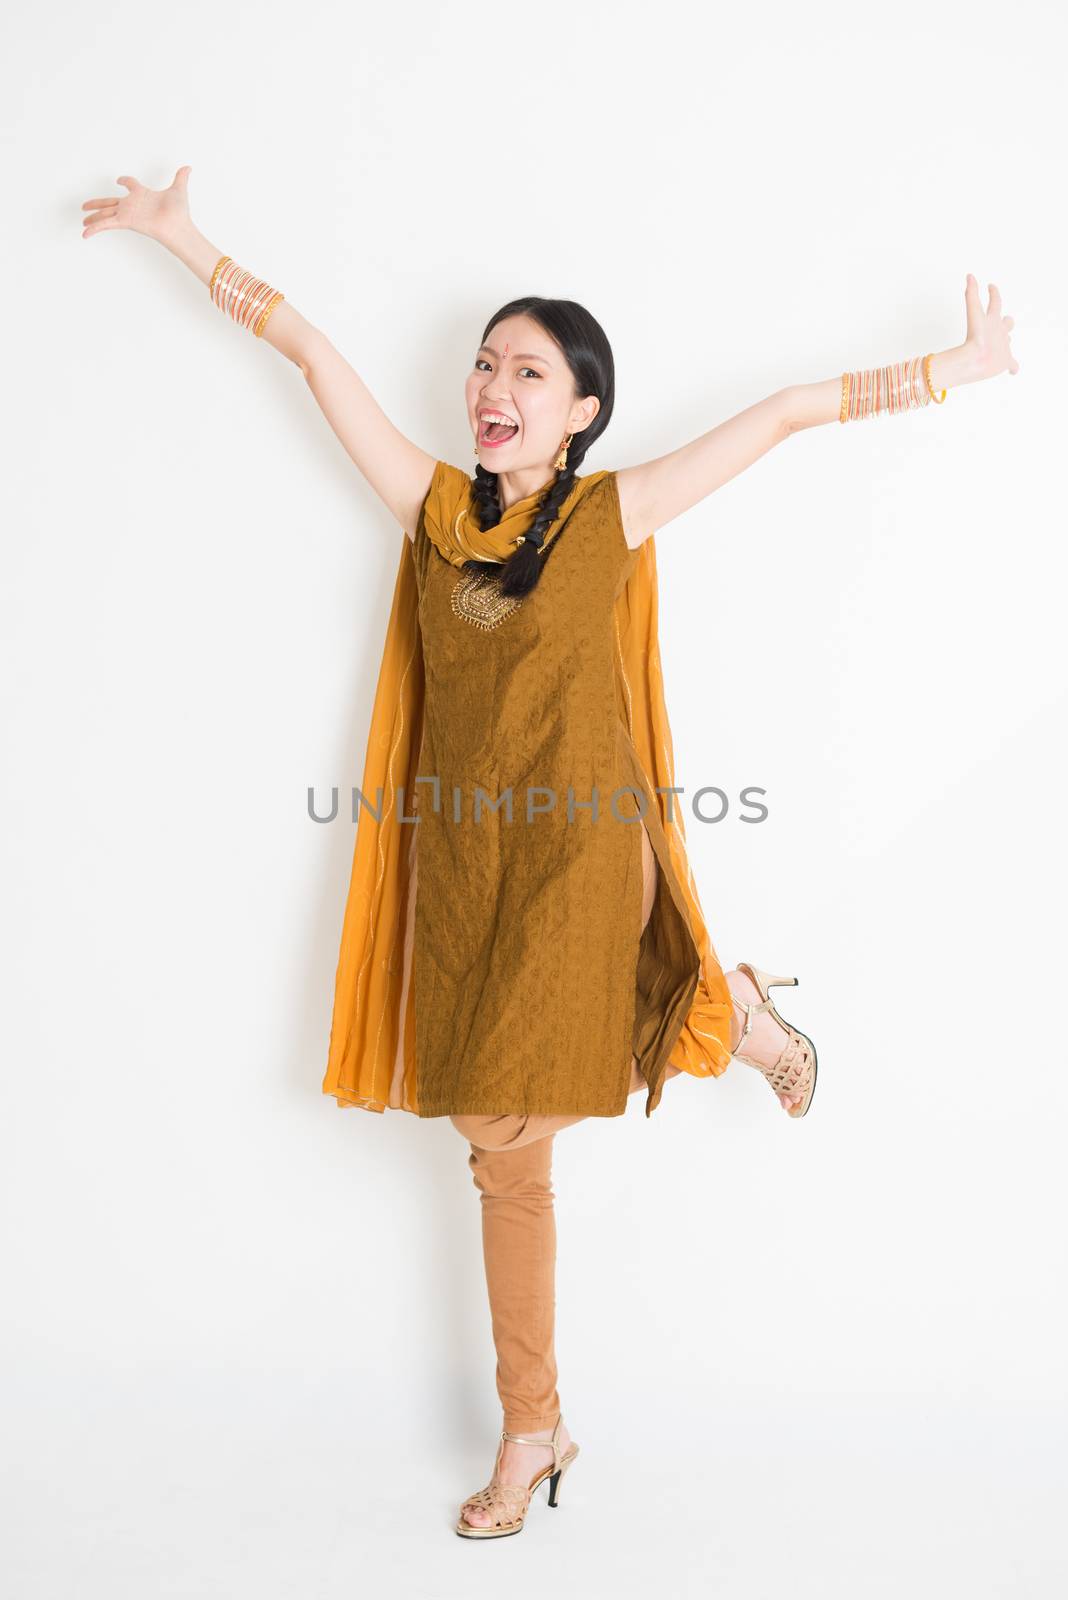 Portrait of excited mixed race Indian Chinese girl in traditional punjabi dress arms outstretched, full length standing on plain white background.